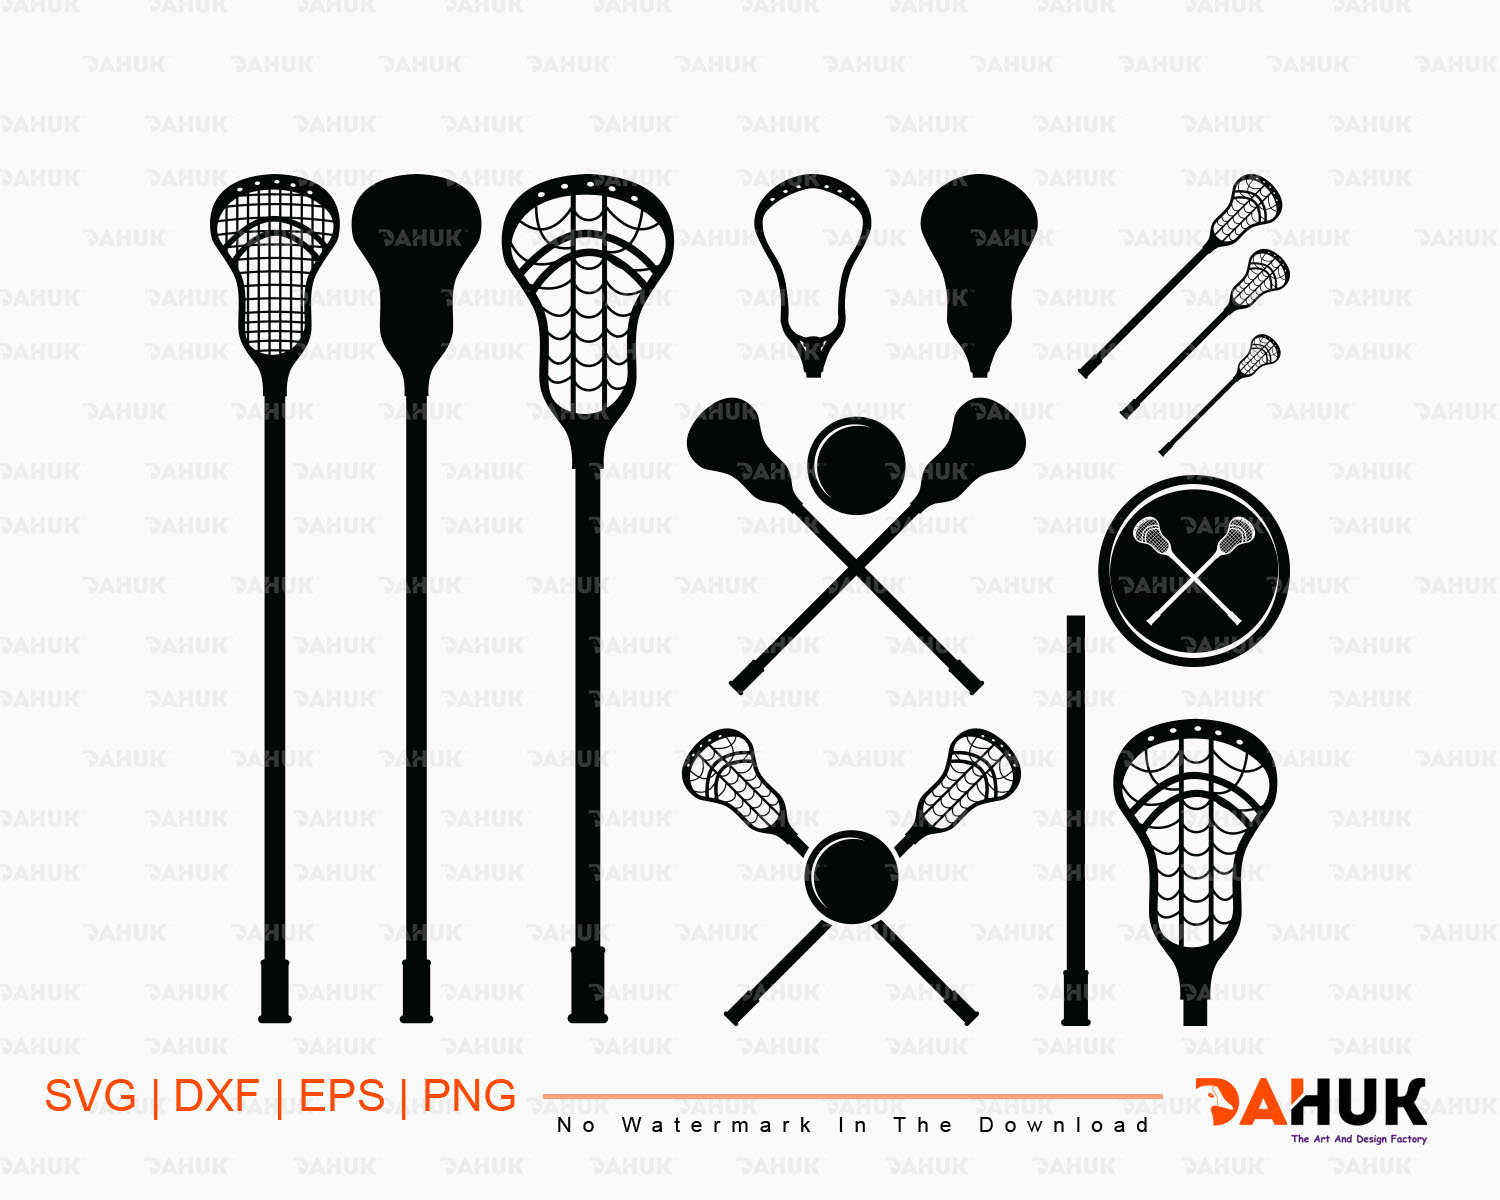 Lacrosse stick svg ball equipment field sports game outfit uniform silhouette eps dxf clipart svg files png cricutcut file instant download